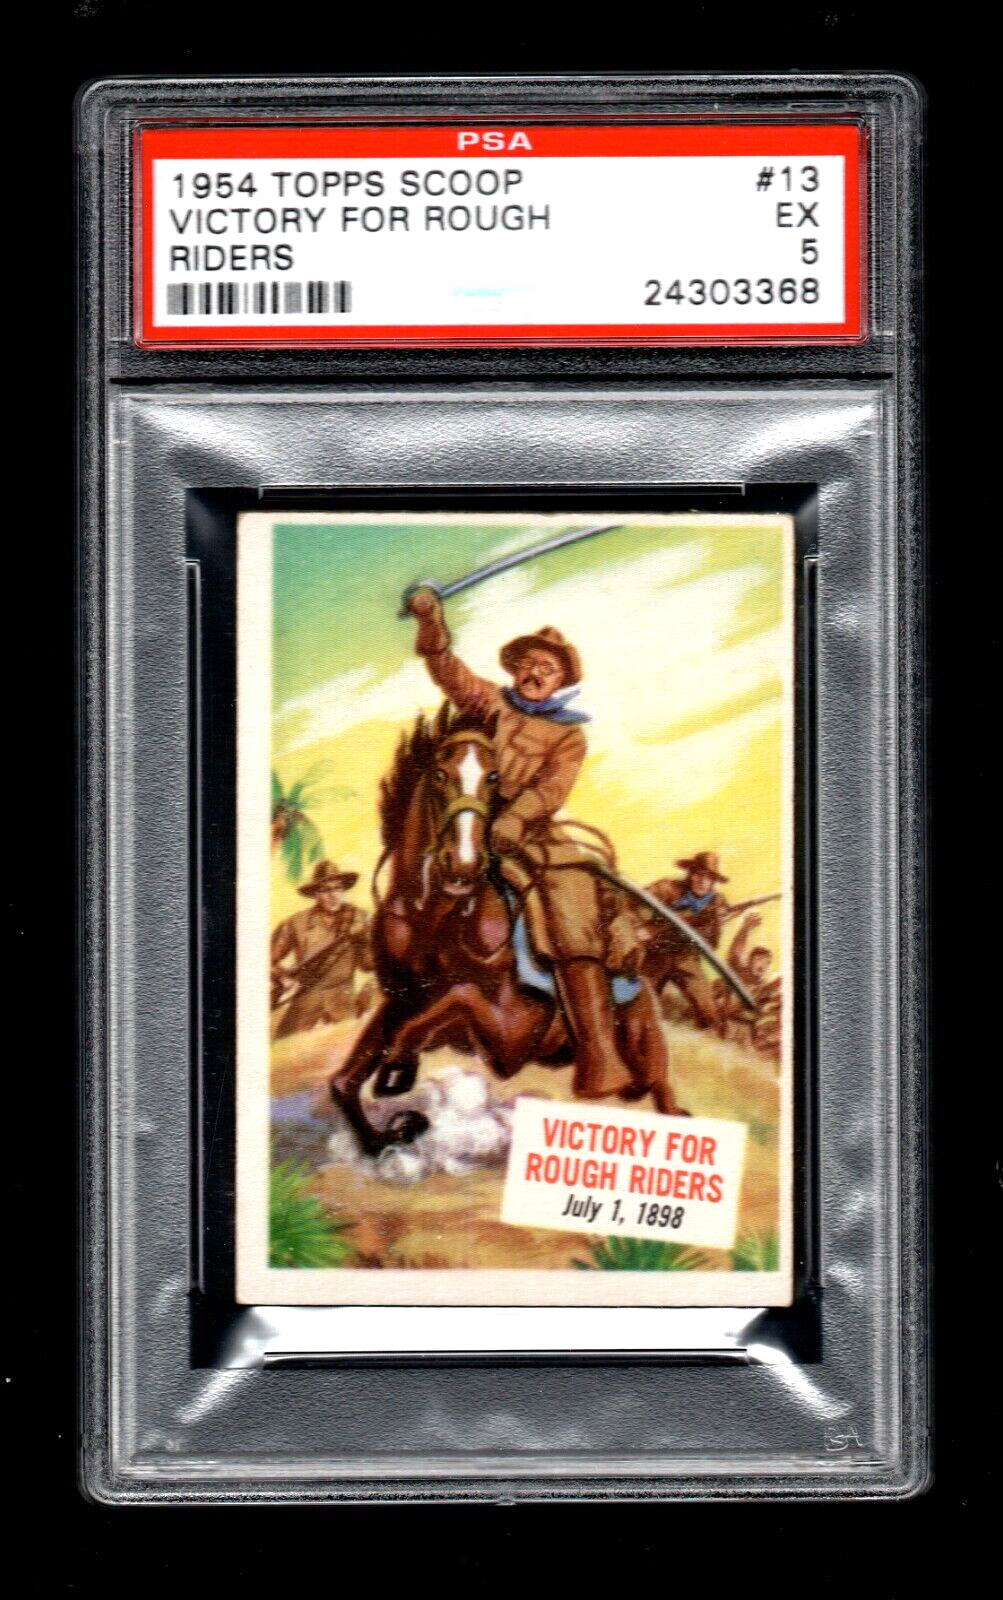 1954 Topps Scoop #13 Victory For Rough Riders July 1, 1898  PSA 5